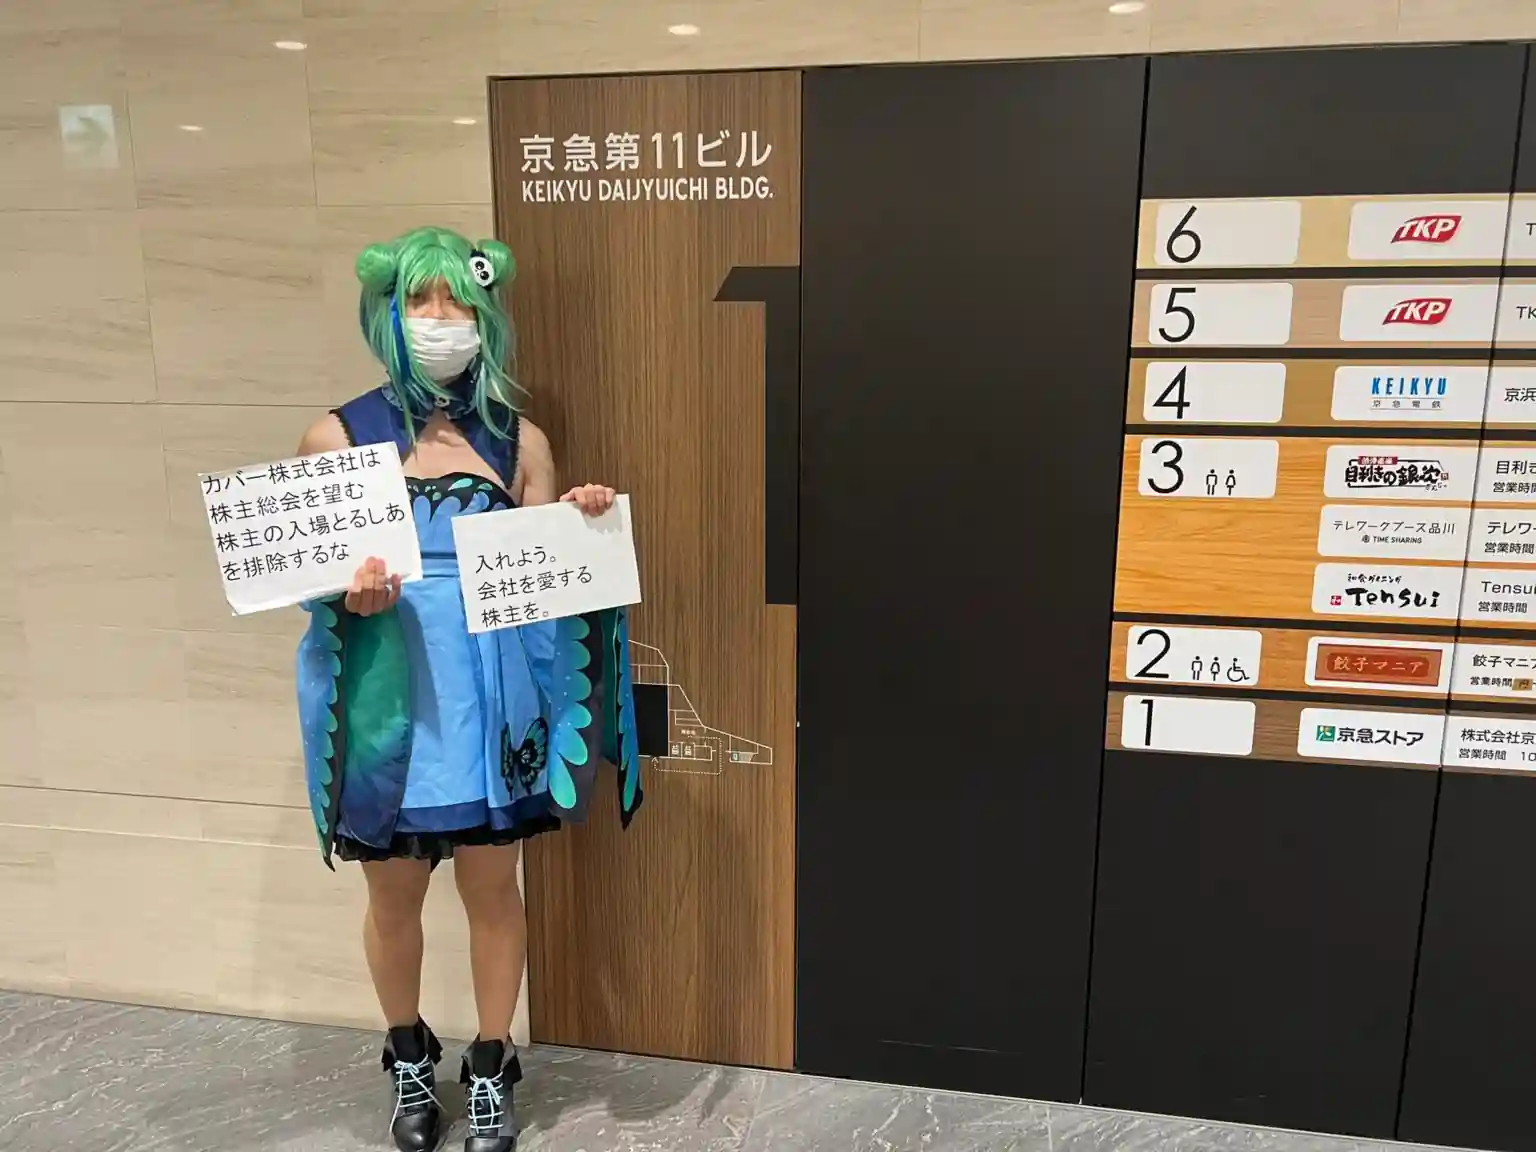 Man with Rushia cosplay protests against the end of her Vtuber activities